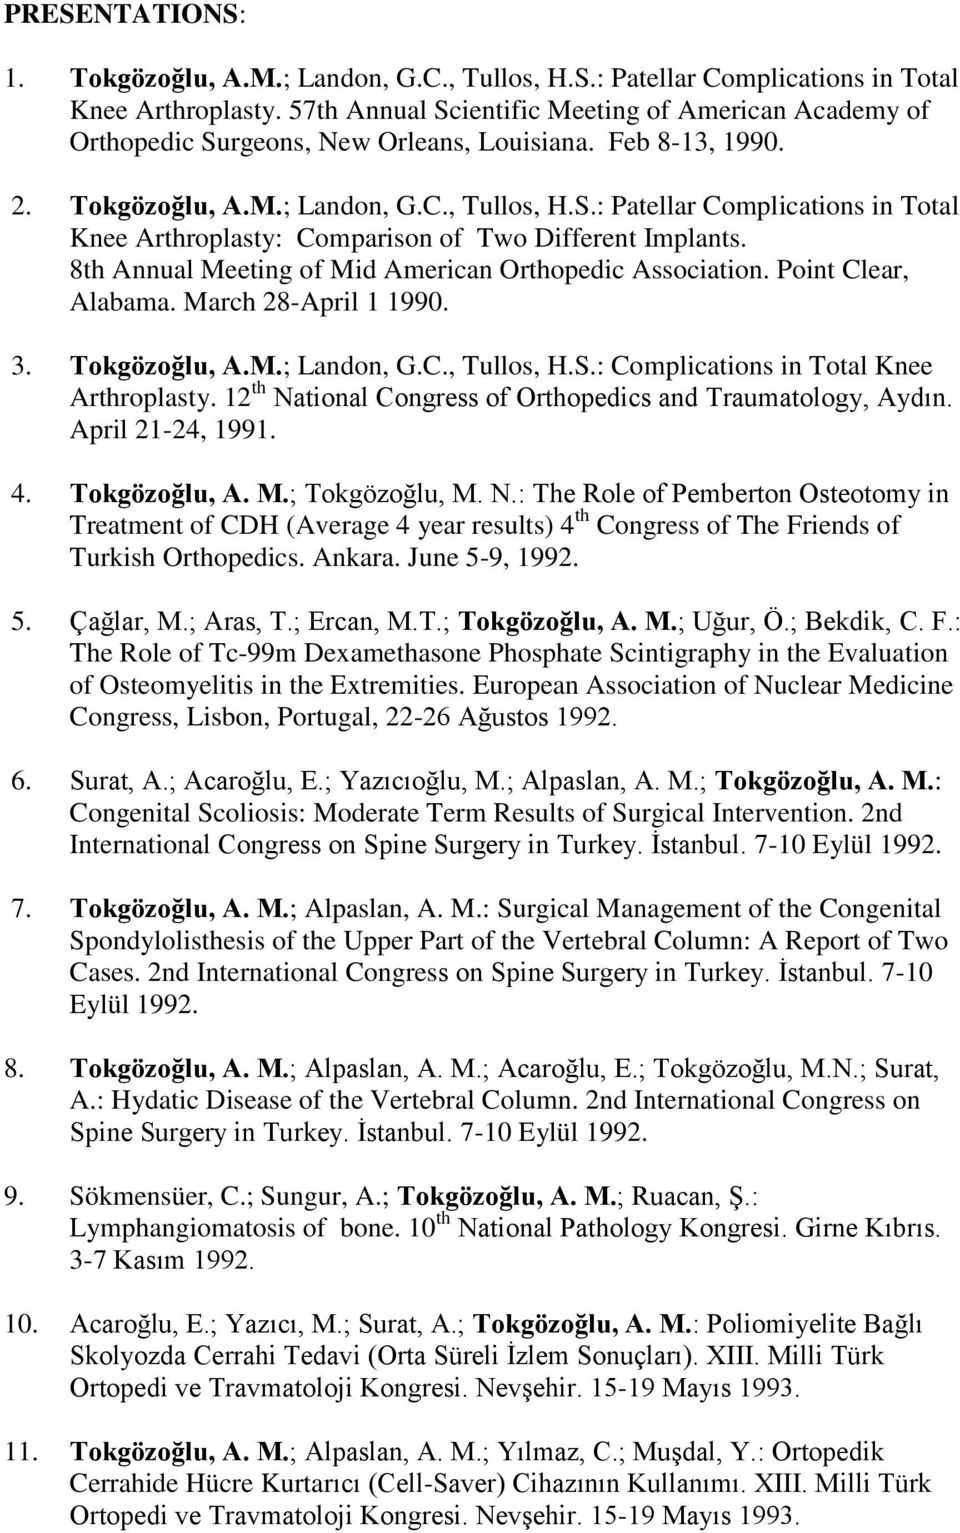 8th Annual Meeting of Mid American Orthopedic Association. Point Clear, Alabama. March 28-April 1 1990. 3. Tokgözoğlu, A.M.; Landon, G.C., Tullos, H.S.: Complications in Total Knee Arthroplasty.